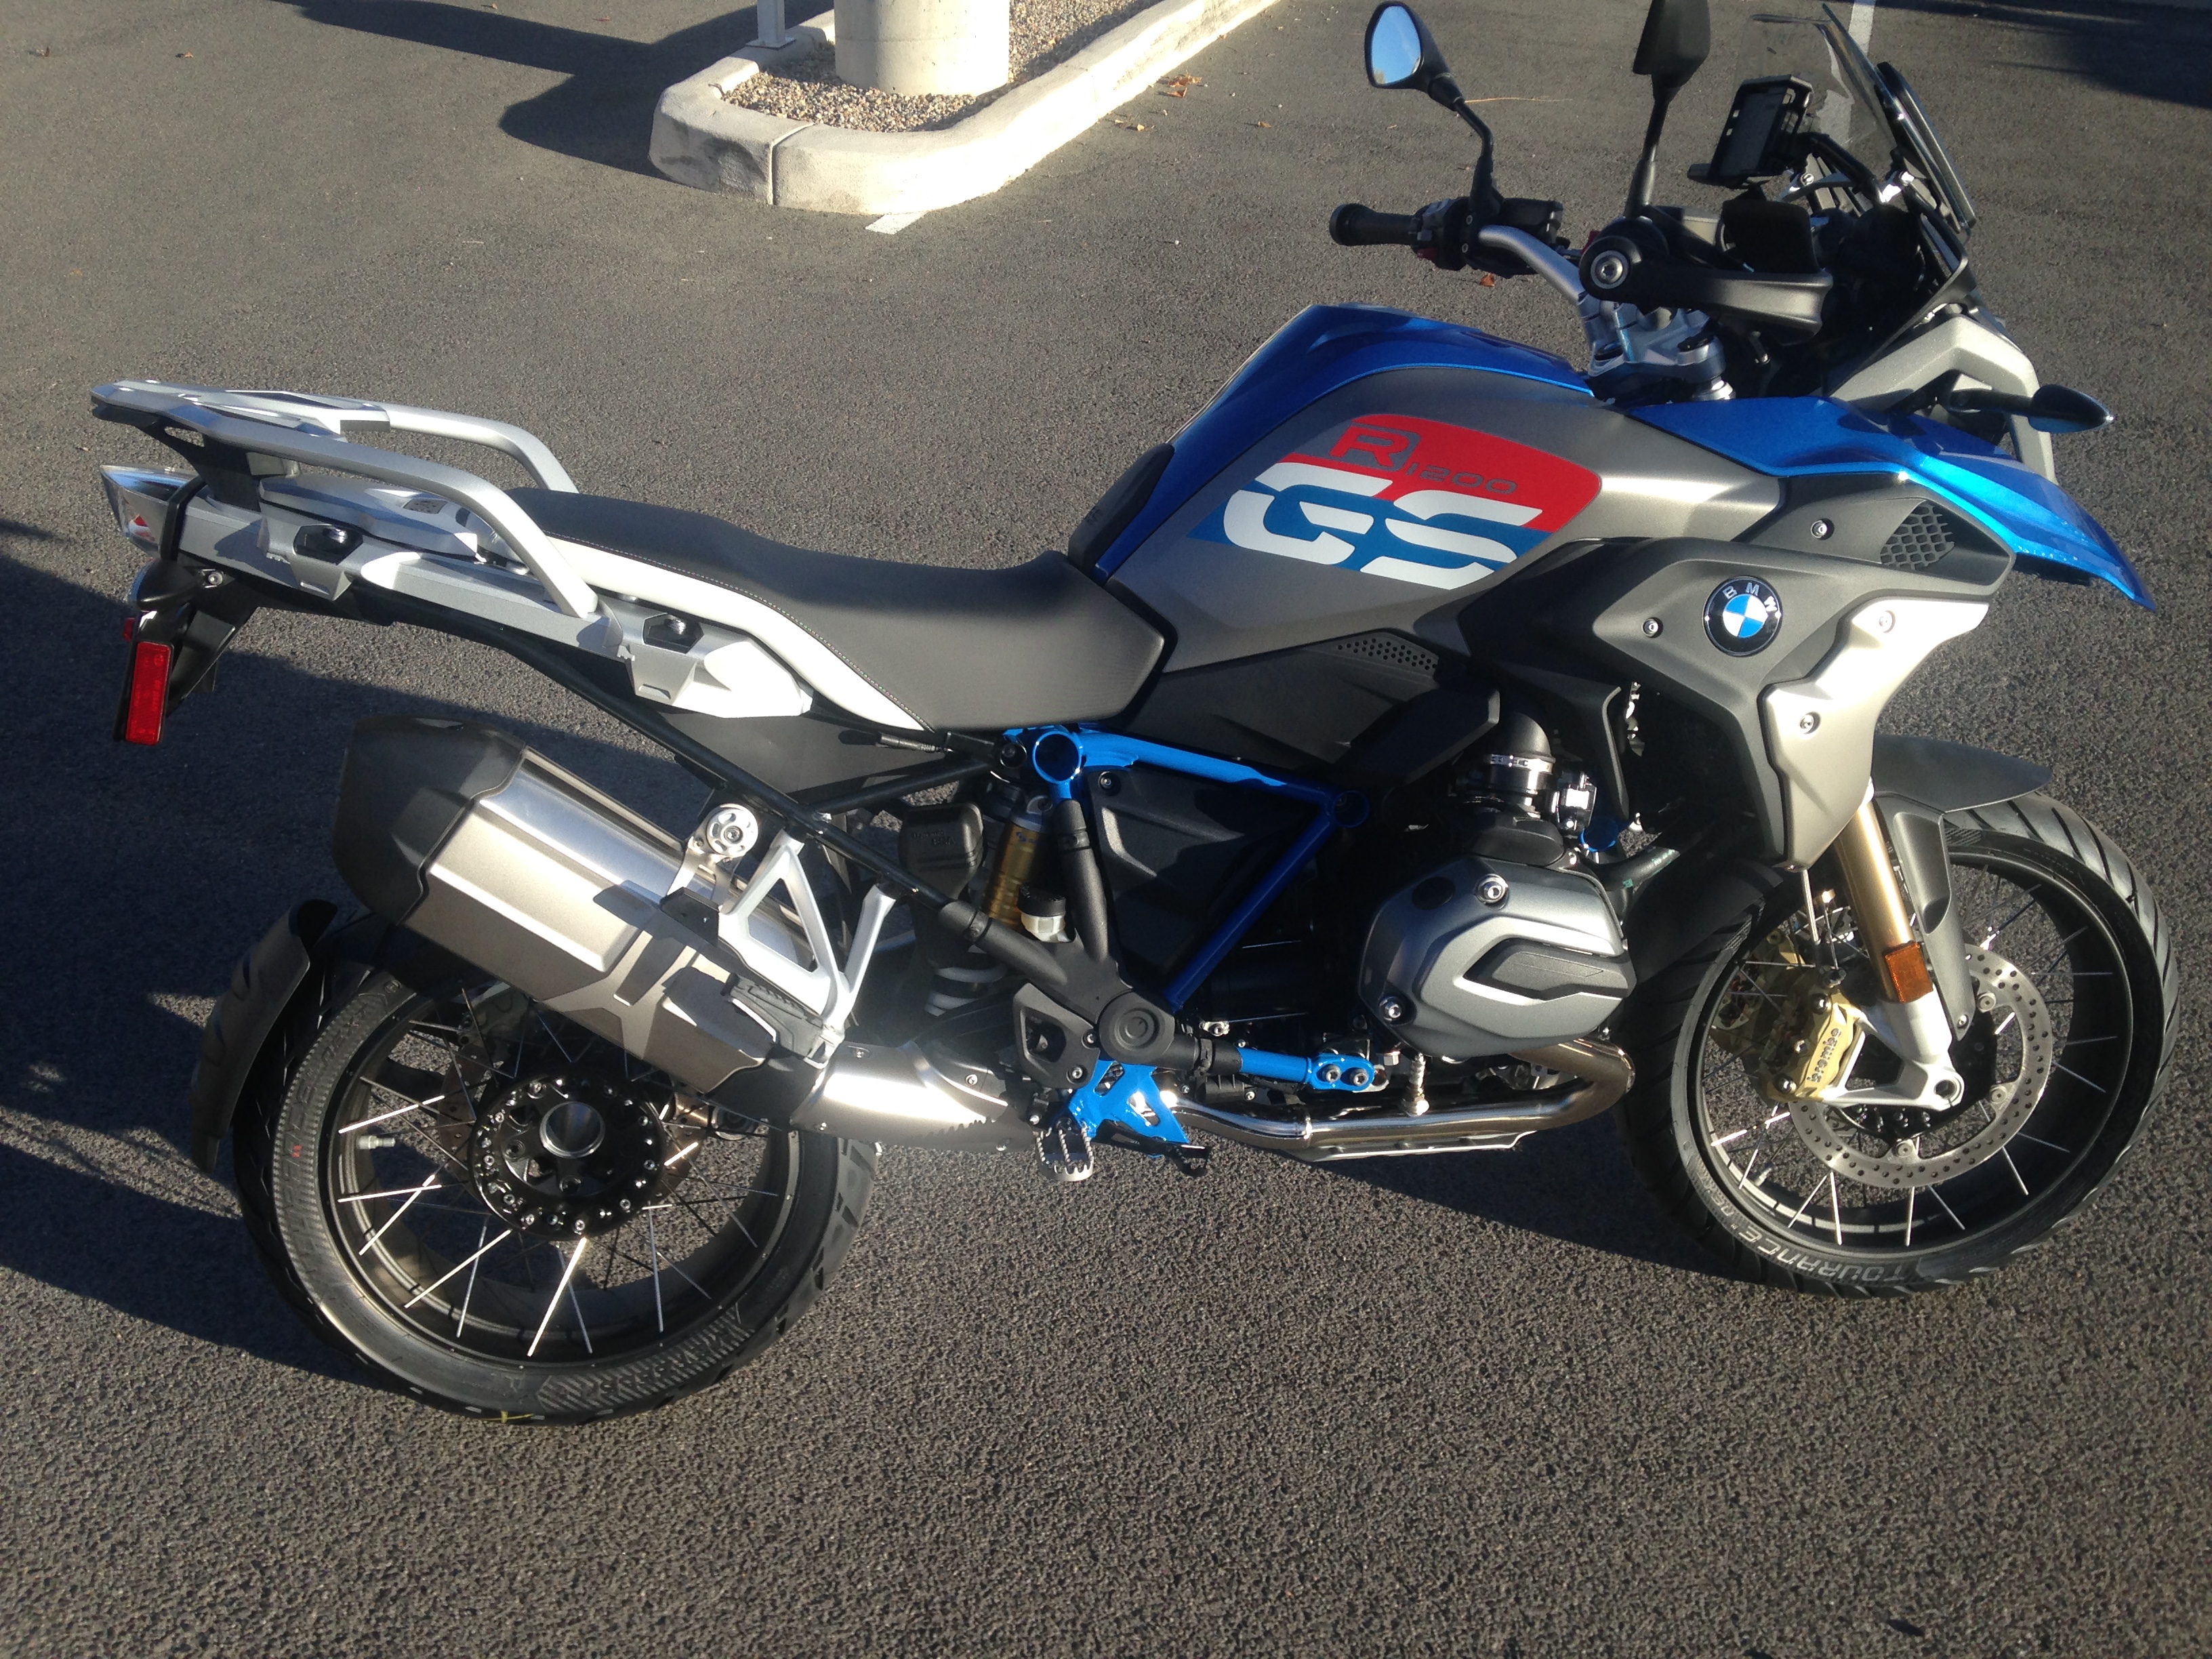 New BMW Motorcycles - R1200GS | Santa Fe BMW Motorcycles ...